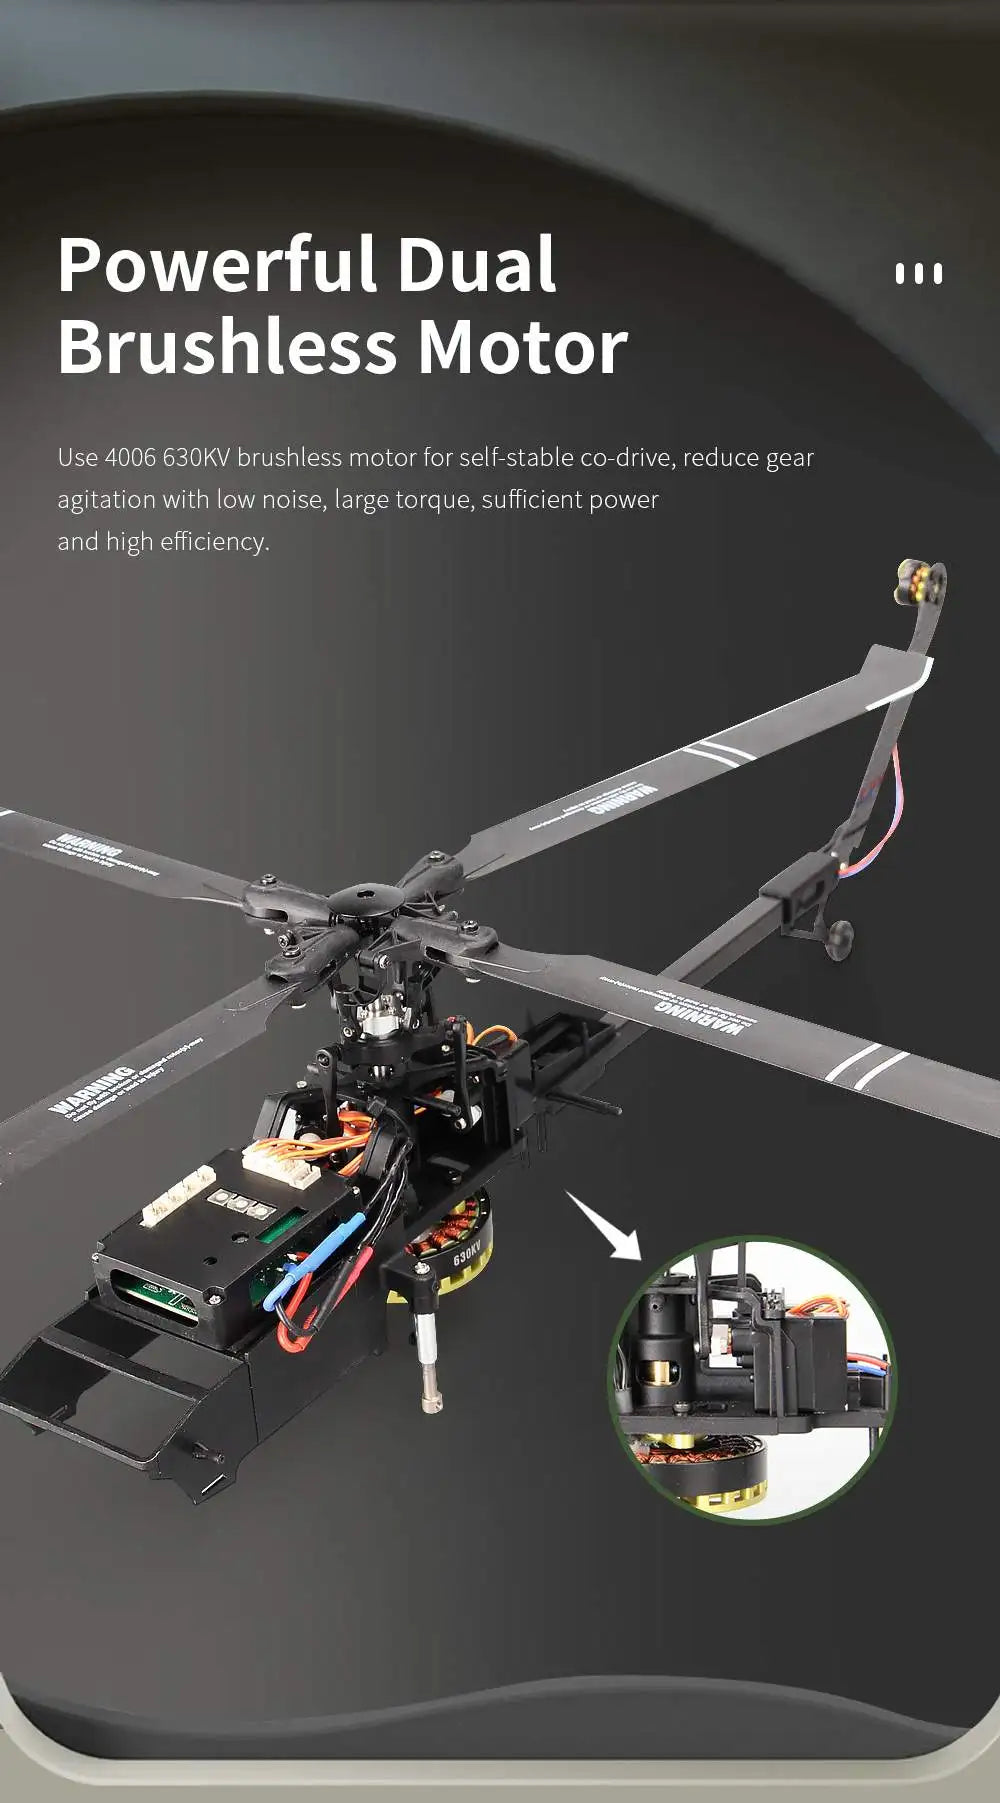 Eachine E200  RC Helicopter, 4006 630KV brushless motor for self-stable co-drive, reduce